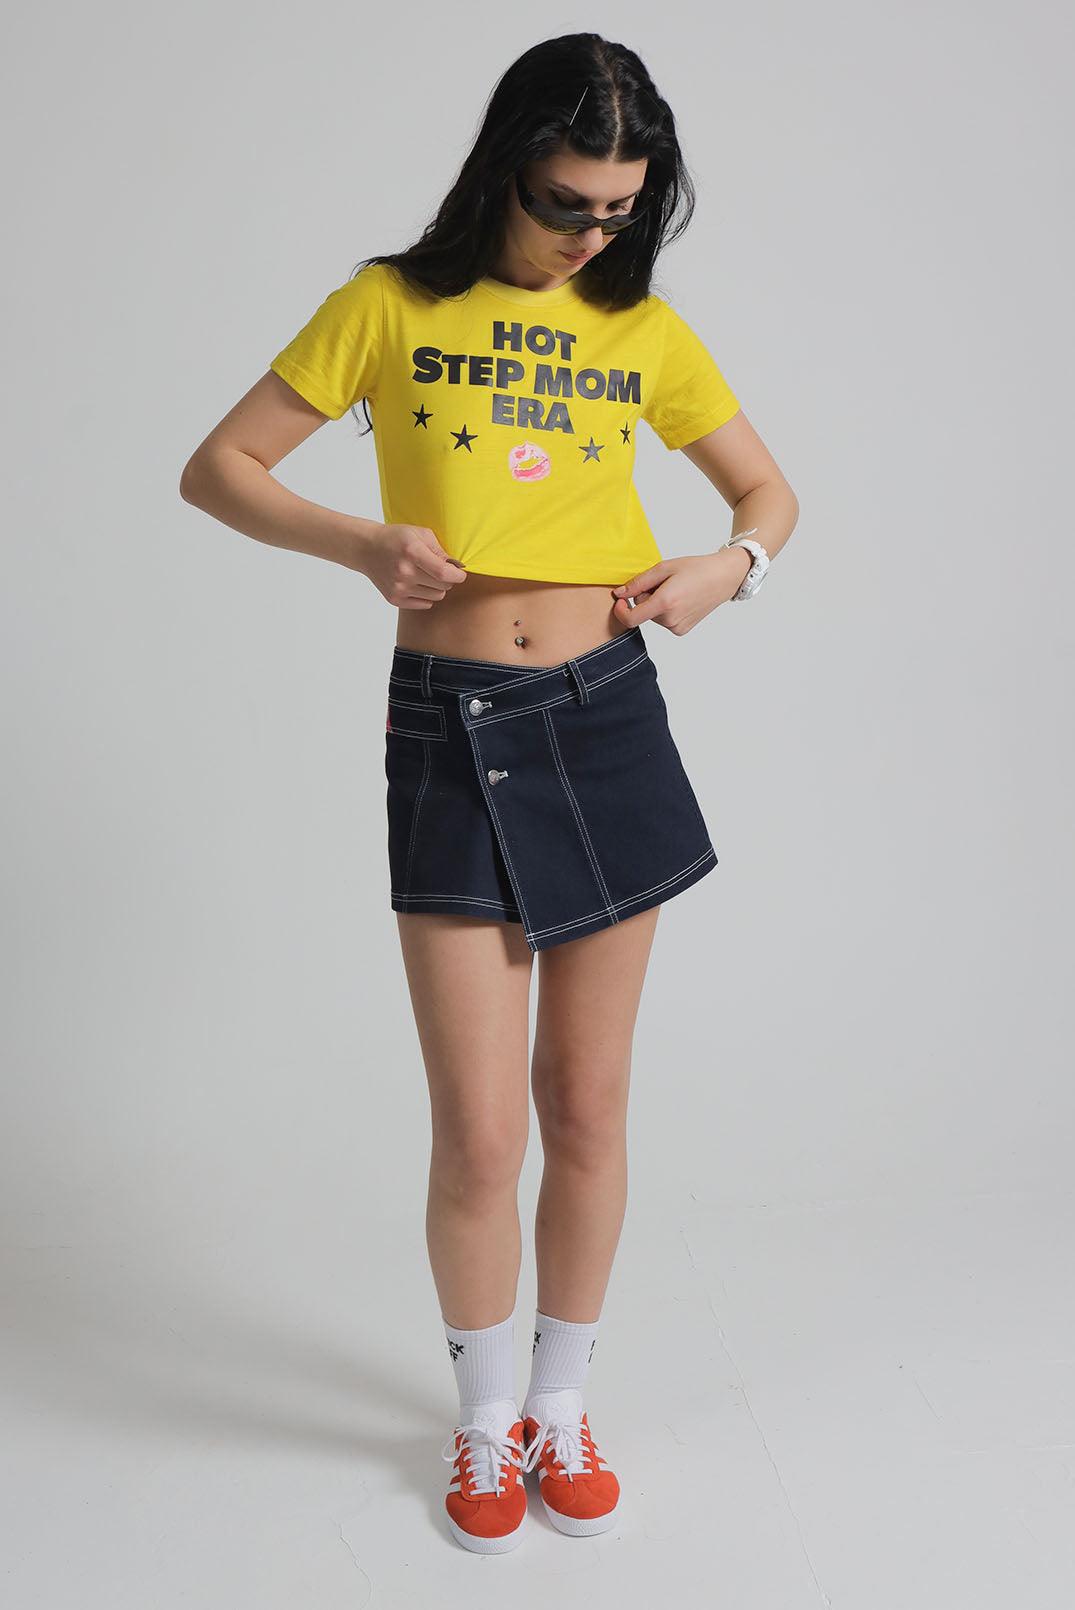 y2k Hot Step Mom - Mum era graphic printed vintage retro inspired yellow cropped fitted baby tee t-shirt